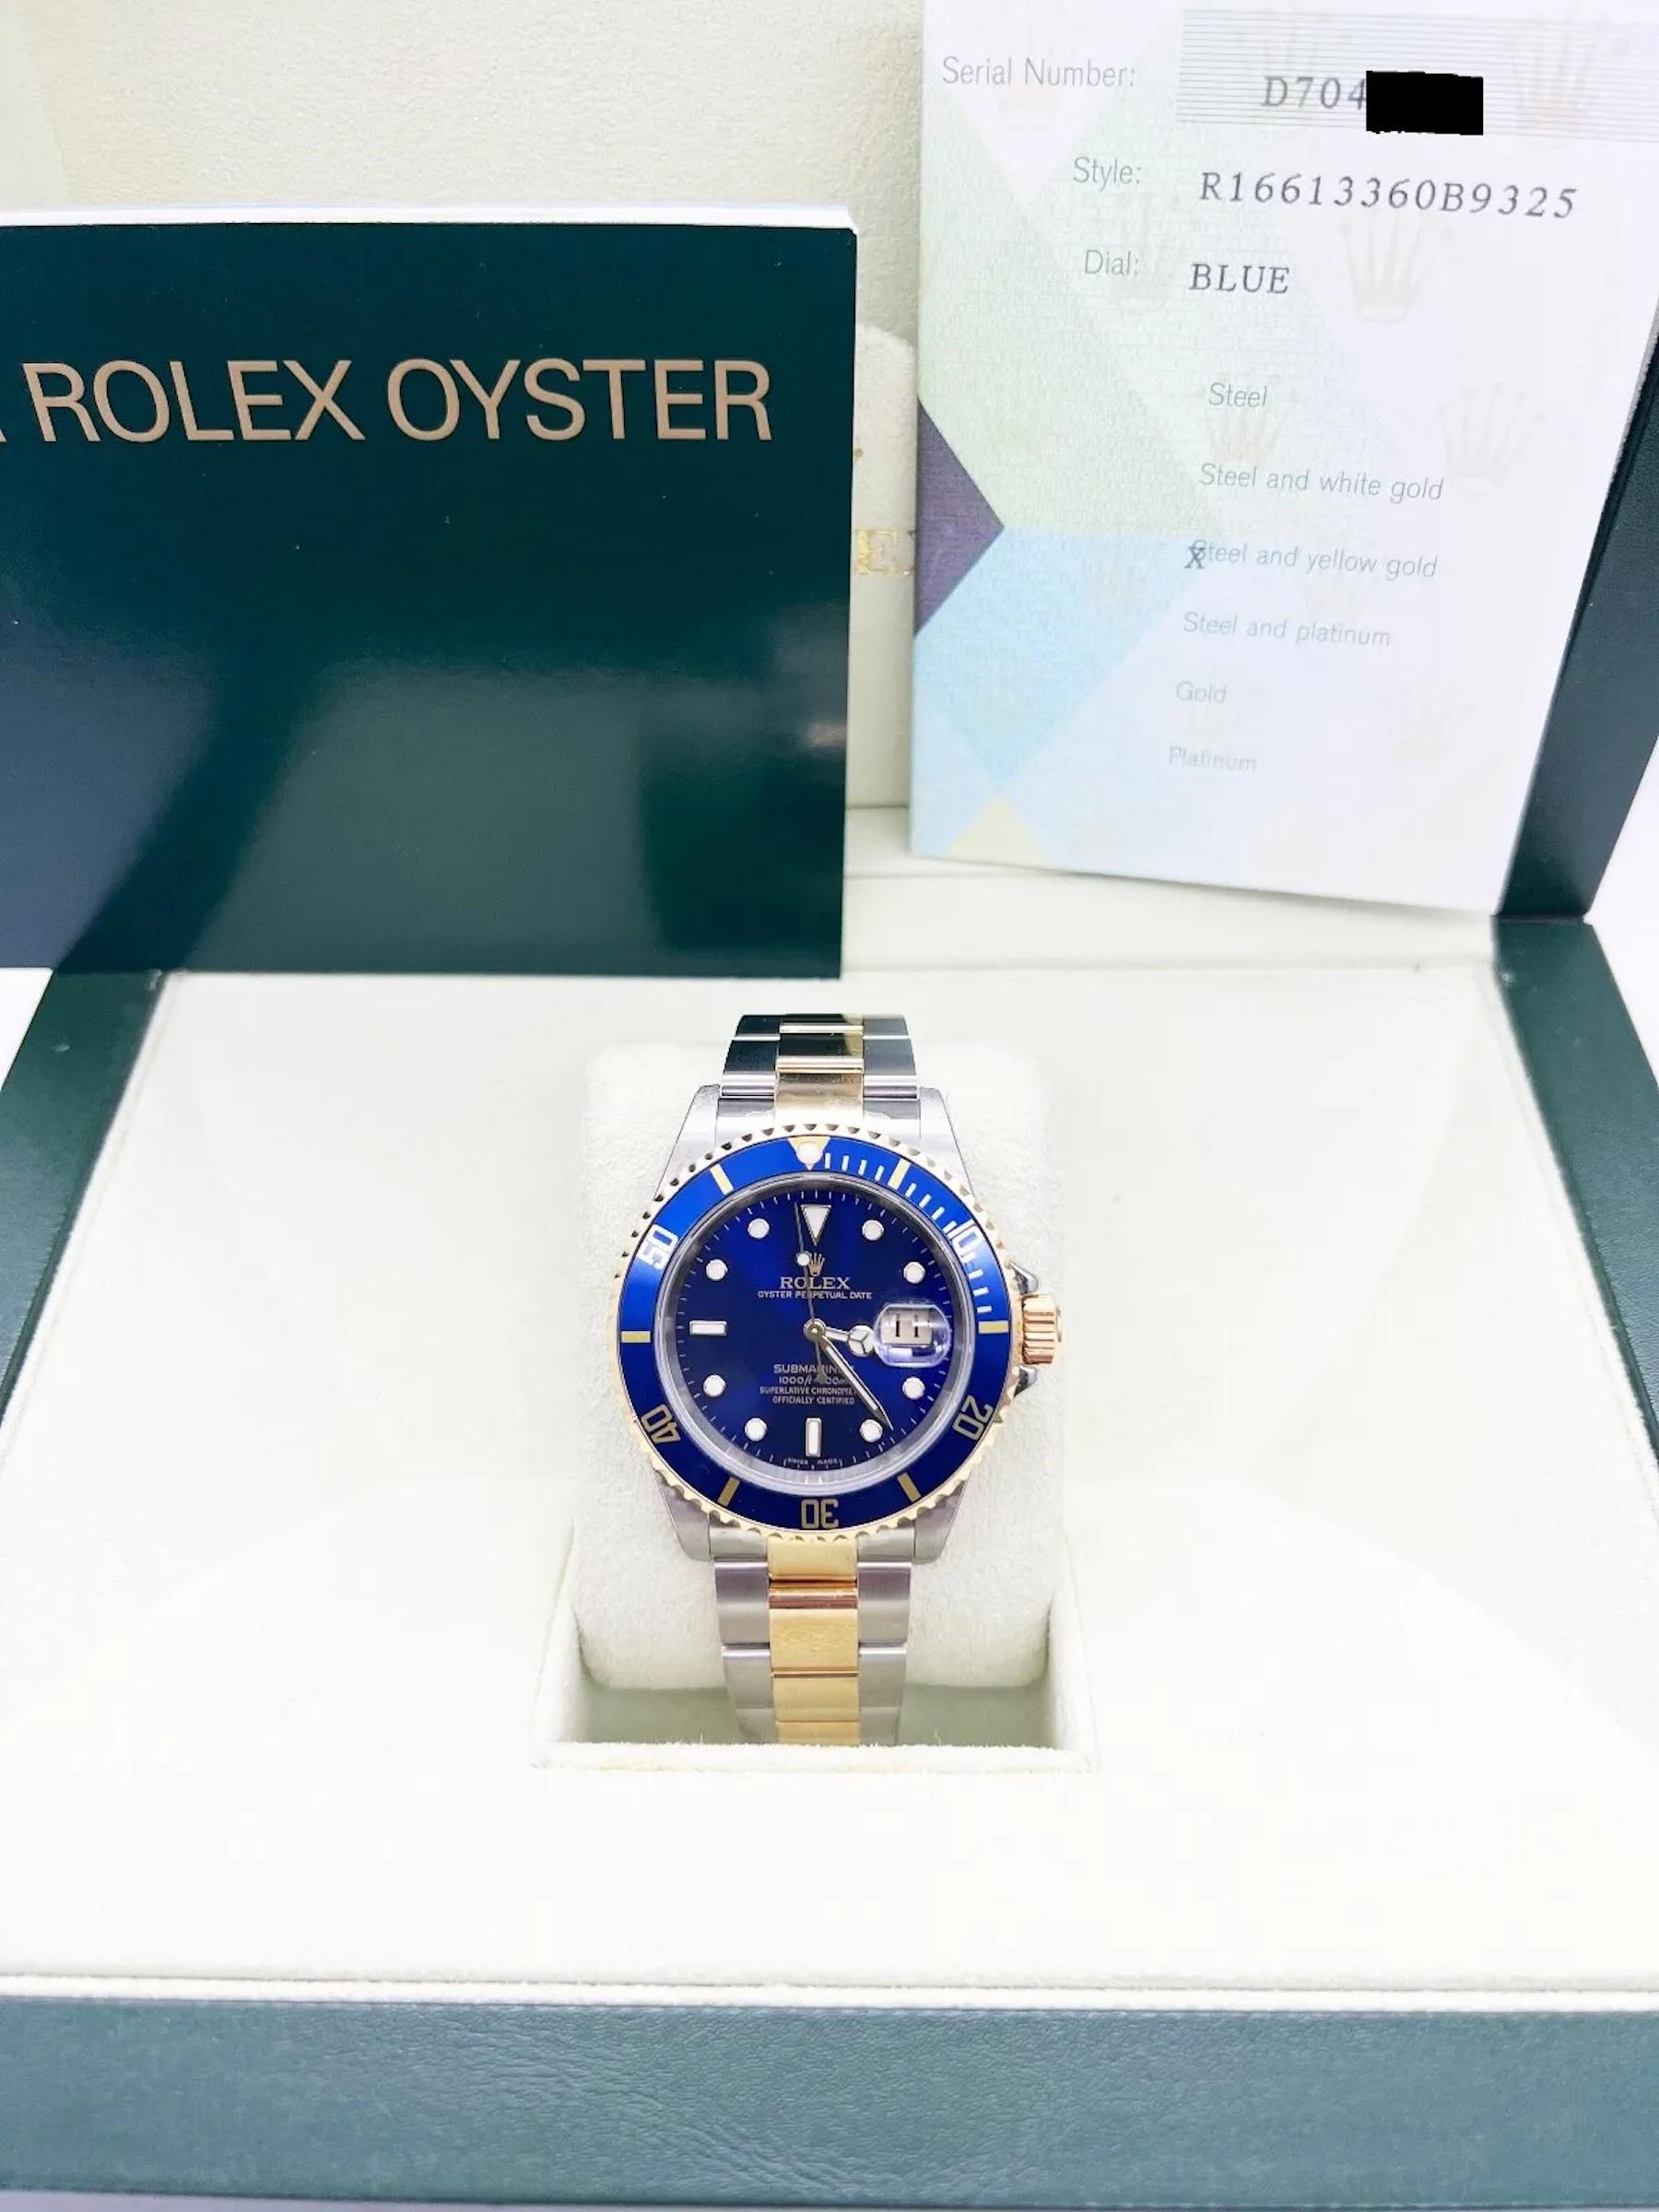 Style Number: 16613

Serial: D704***

Year: 2007

Model: Submariner

Case Material: Stainless Steel

Band: 18K Yellow Gold & Stainless Steel 

Bezel: Blue

Dial: Blue

Face: Sapphire Crystal

Case Size: 40mm

Includes: 

-Rolex Box &